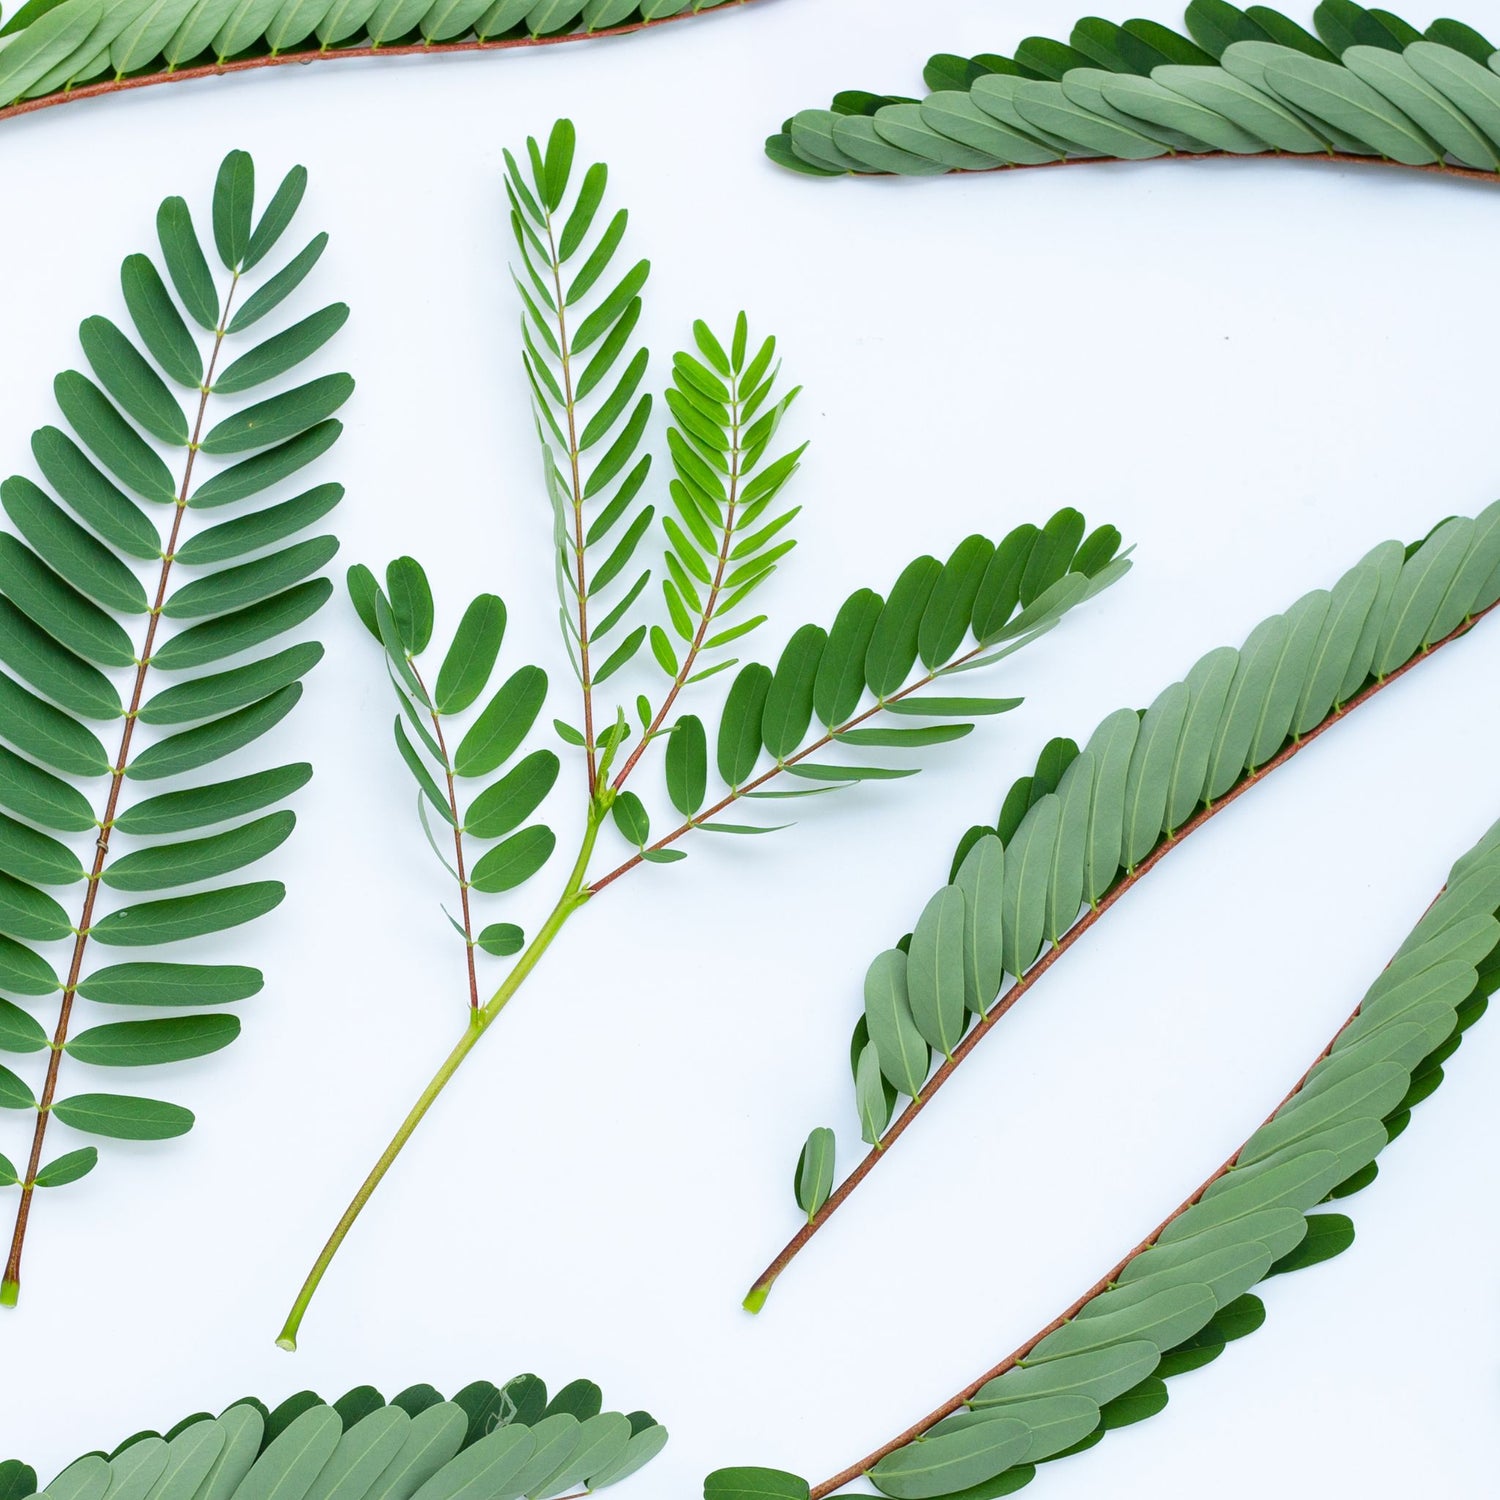 Image of Sesbania Leaves, a natural plant-based source of biotin